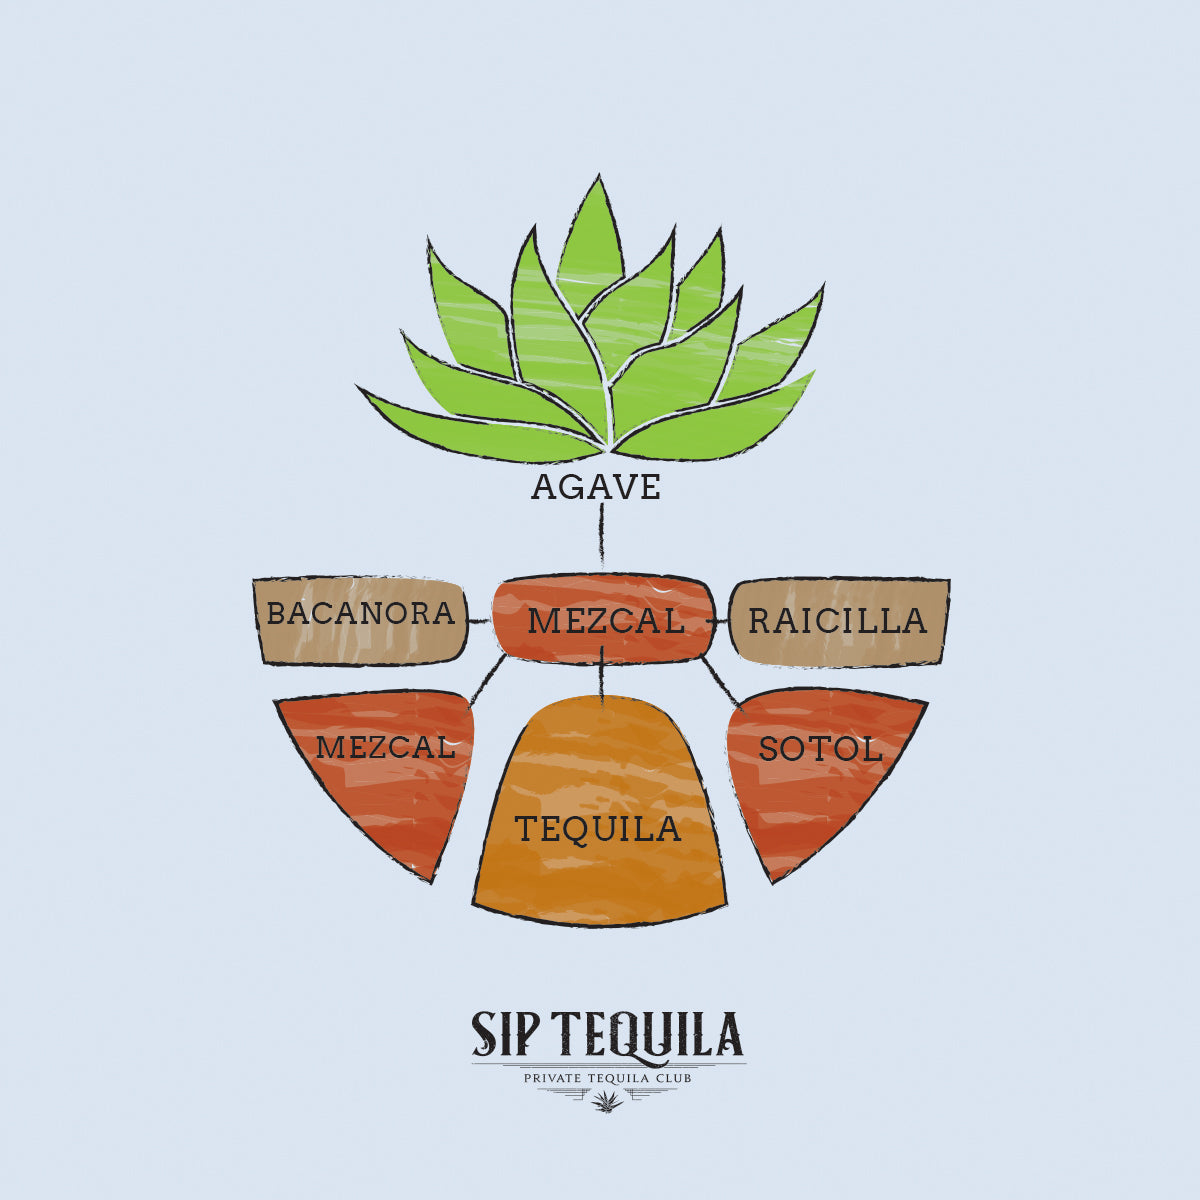 Hierarchy of Agave